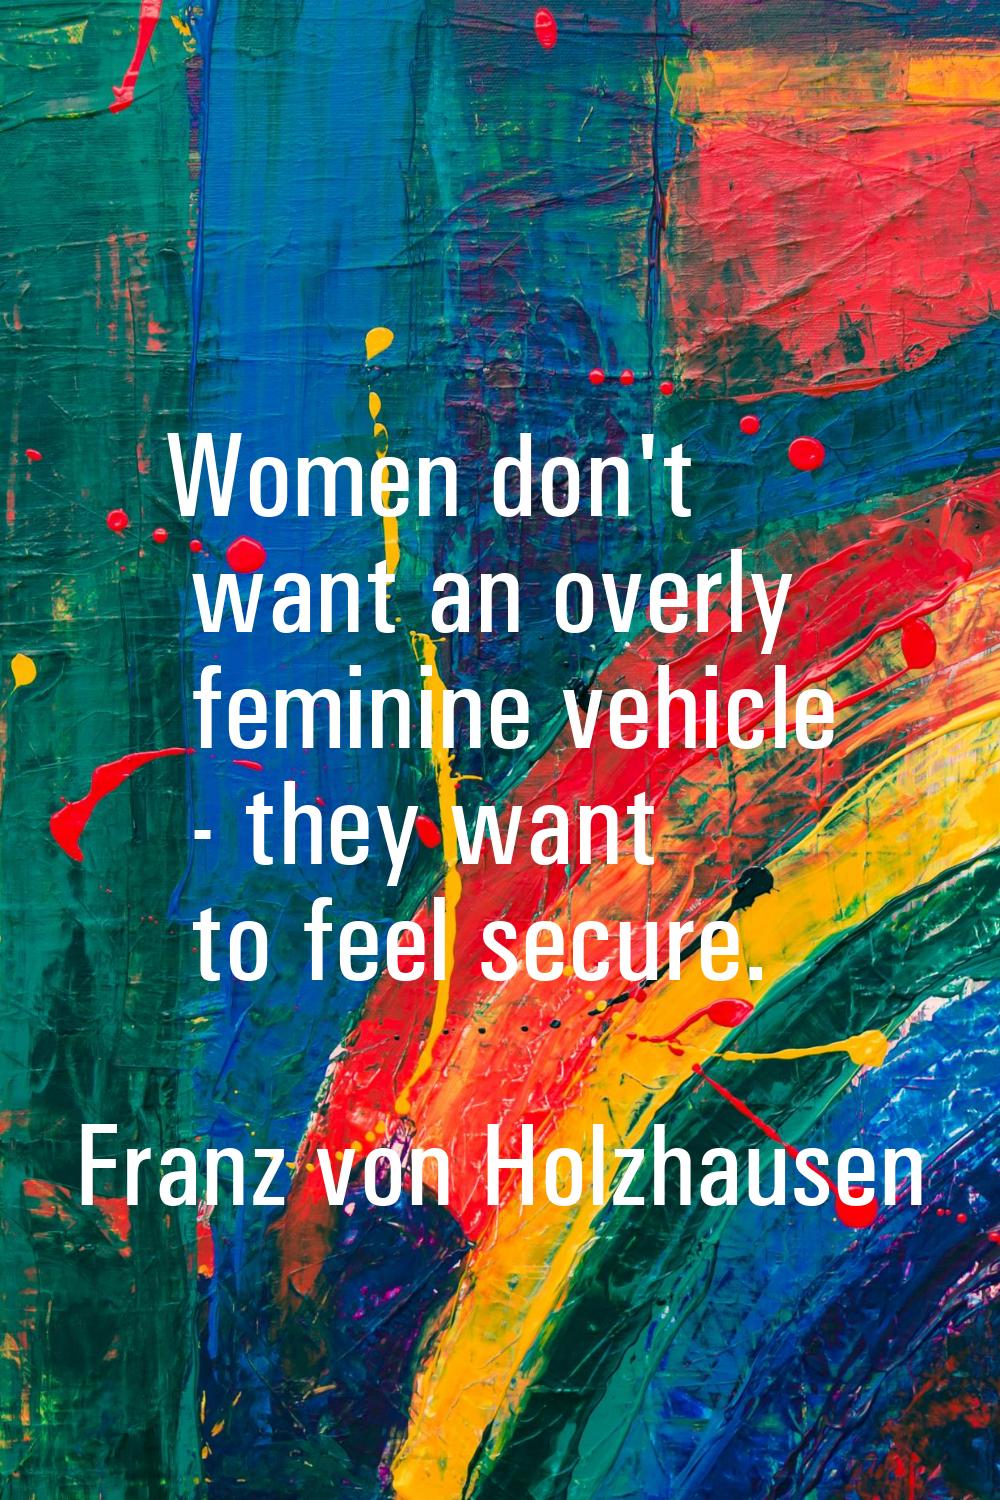 Women don't want an overly feminine vehicle - they want to feel secure.